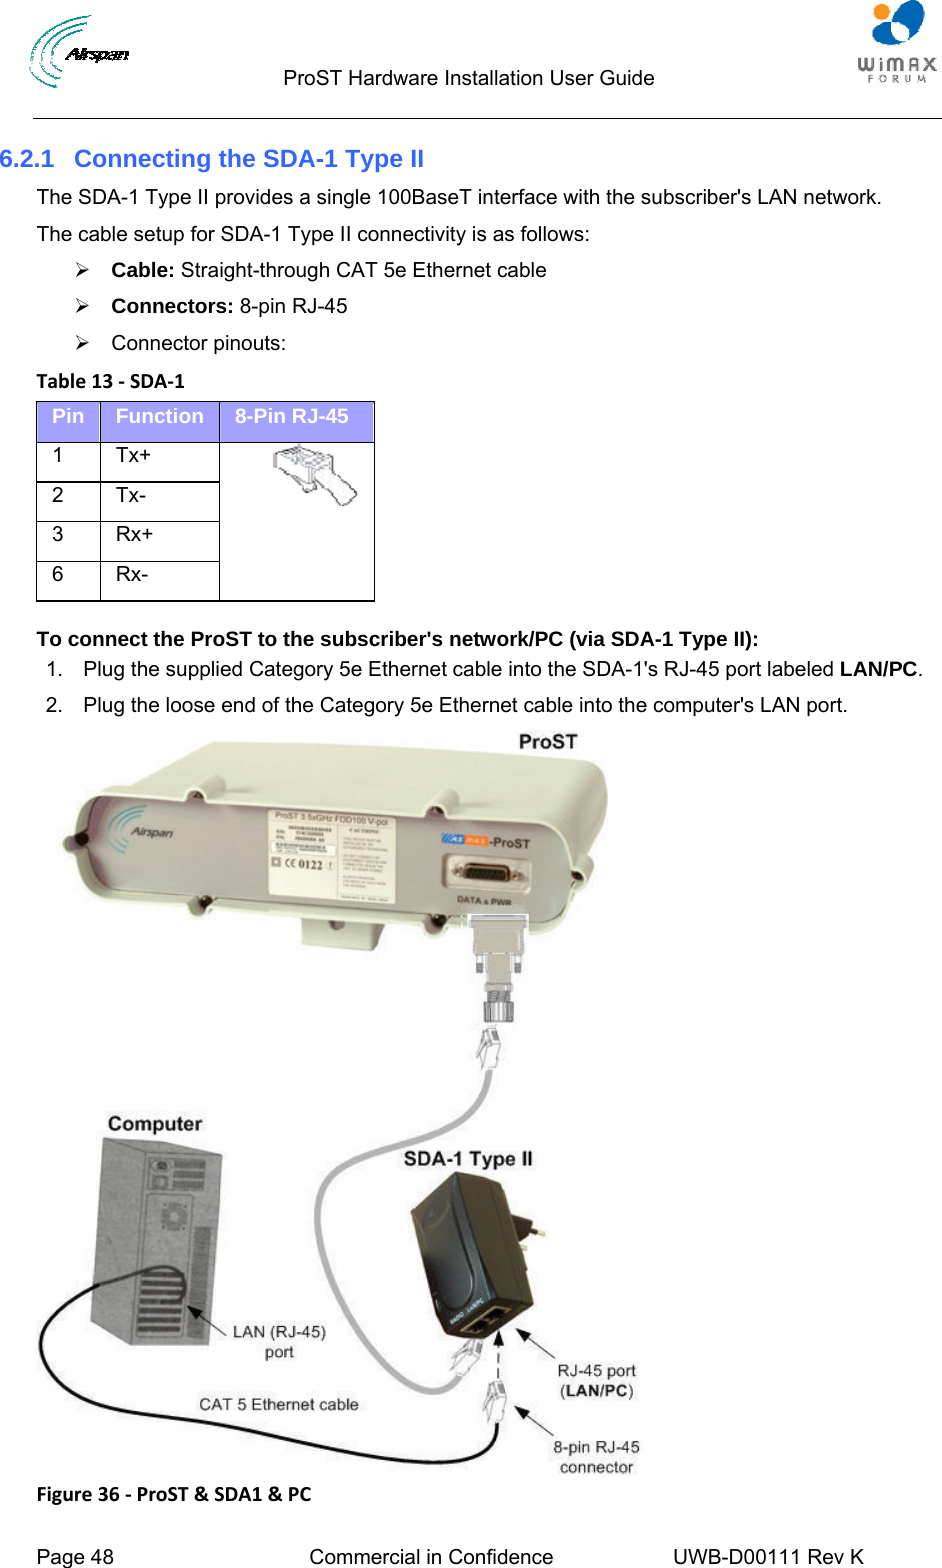                                  ProST Hardware Installation User Guide  Page 48  Commercial in Confidence  UWB-D00111 Rev K   6.2.1  Connecting the SDA-1 Type II The SDA-1 Type II provides a single 100BaseT interface with the subscriber&apos;s LAN network. The cable setup for SDA-1 Type II connectivity is as follows: ¾ Cable: Straight-through CAT 5e Ethernet cable ¾ Connectors: 8-pin RJ-45 ¾ Connector pinouts: Table13‐SDA‐1Pin  Function  8-Pin RJ-45 1 Tx+ 2 Tx- 3 Rx+ 6 Rx-    To connect the ProST to the subscriber&apos;s network/PC (via SDA-1 Type II): 1.  Plug the supplied Category 5e Ethernet cable into the SDA-1&apos;s RJ-45 port labeled LAN/PC. 2.  Plug the loose end of the Category 5e Ethernet cable into the computer&apos;s LAN port.  Figure36‐ProST&amp;SDA1&amp;PC